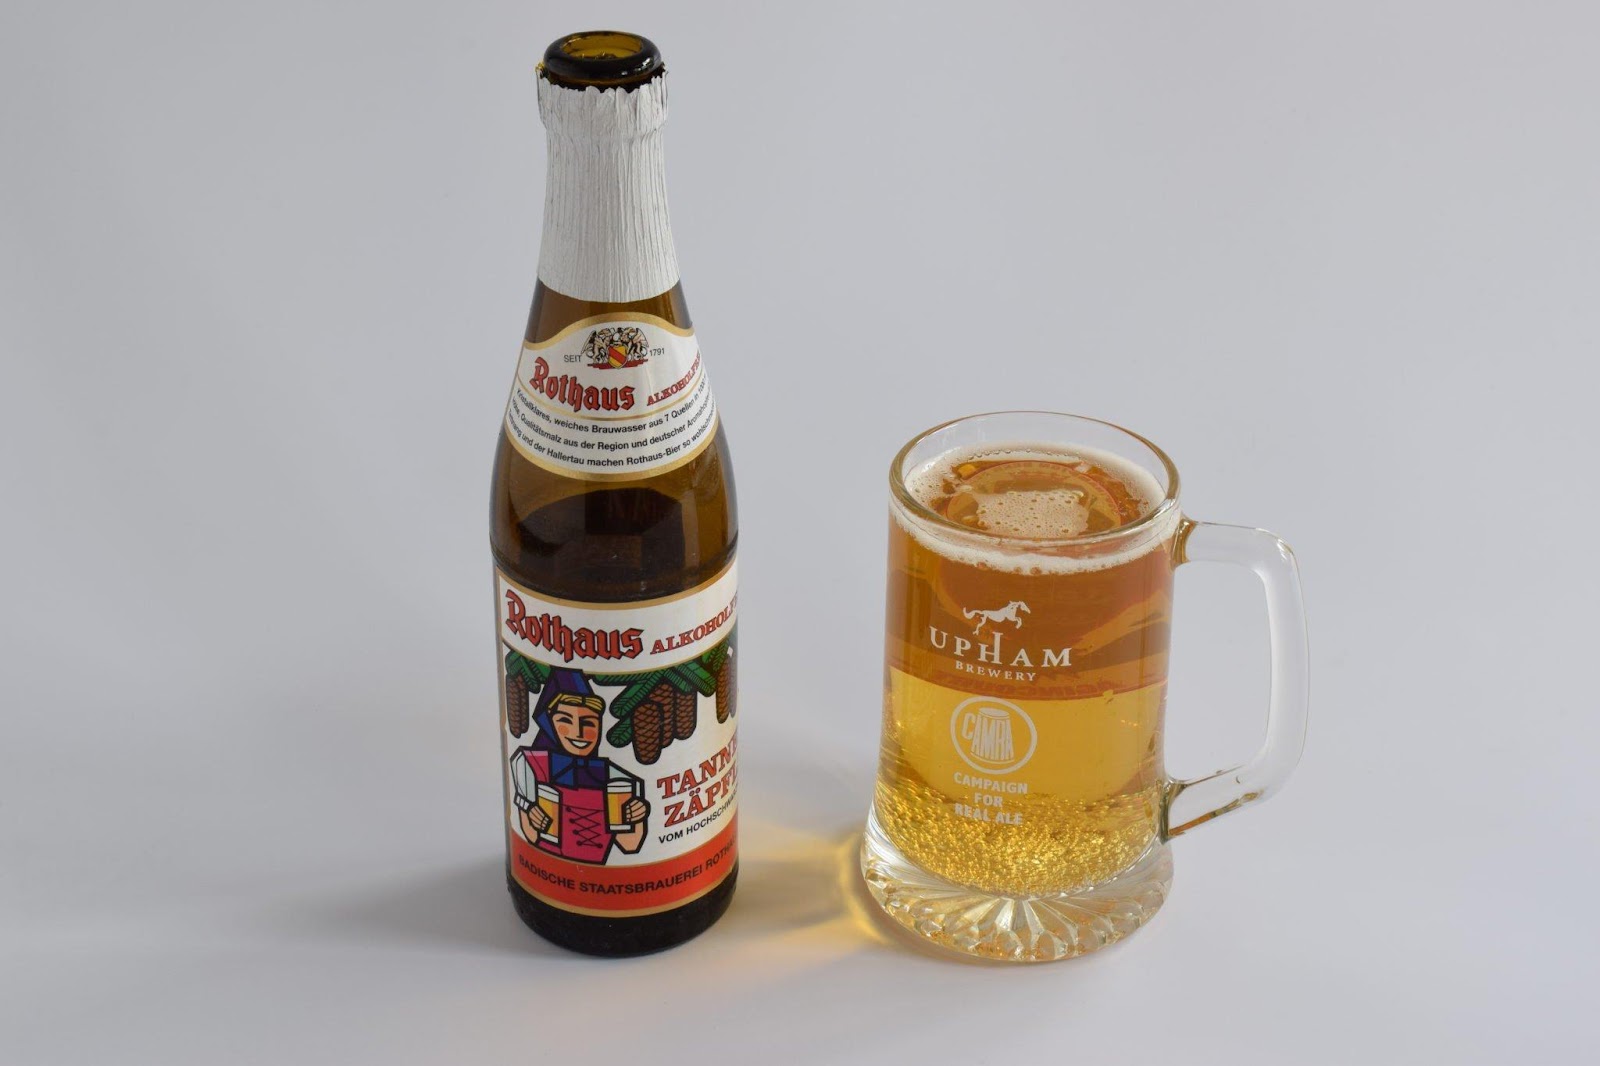 A bottle of Rothaus Tannenzäpfle beer and a full beer mug sitting on a desk